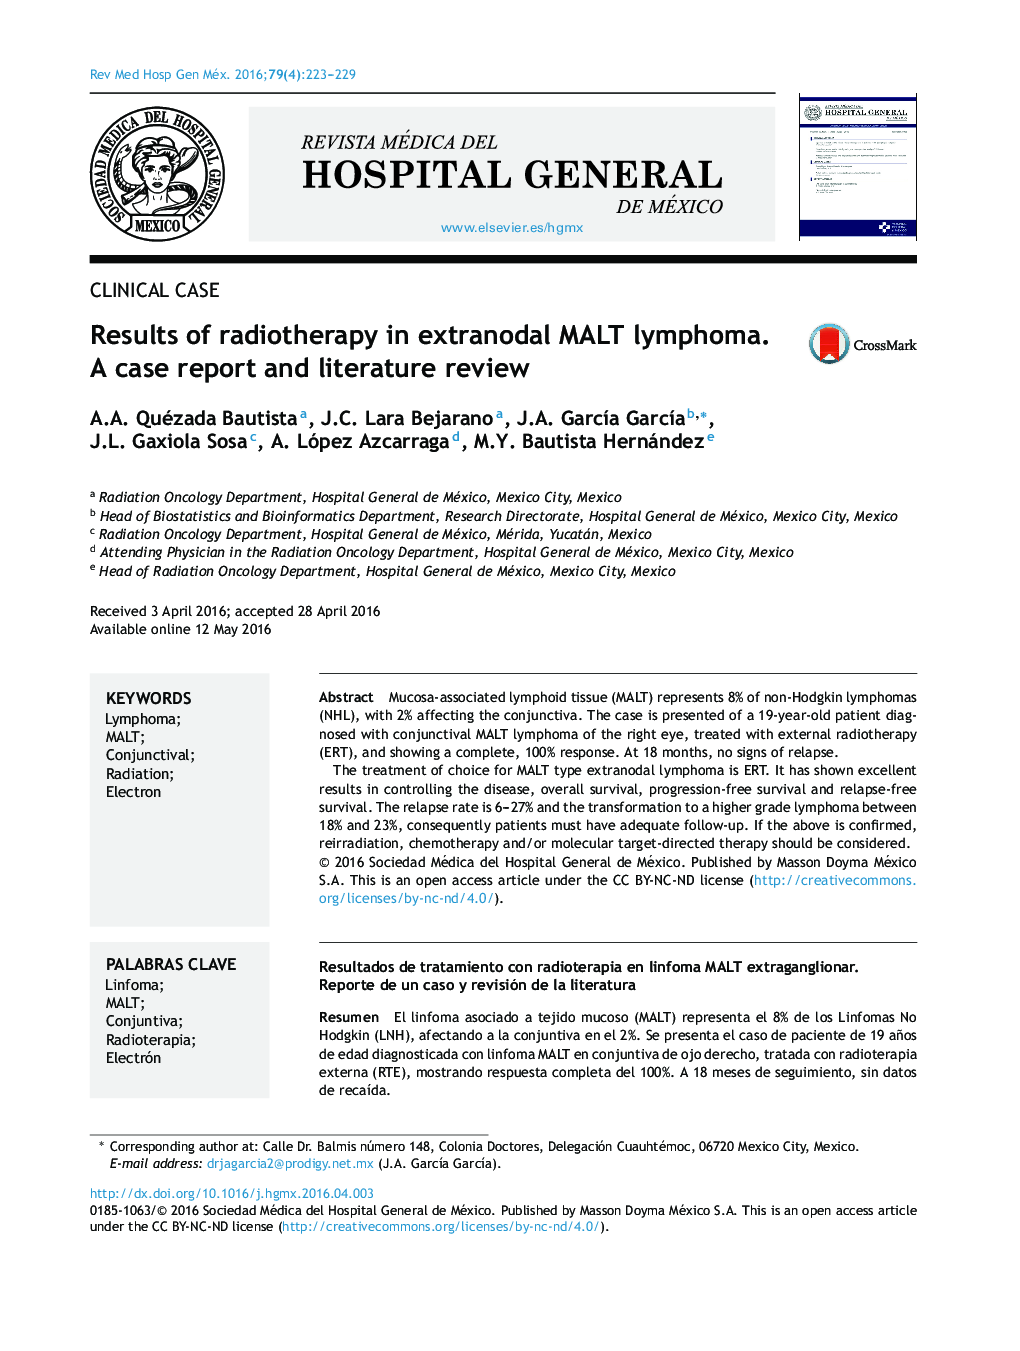 Results of radiotherapy in extranodal MALT lymphoma. A case report and literature review